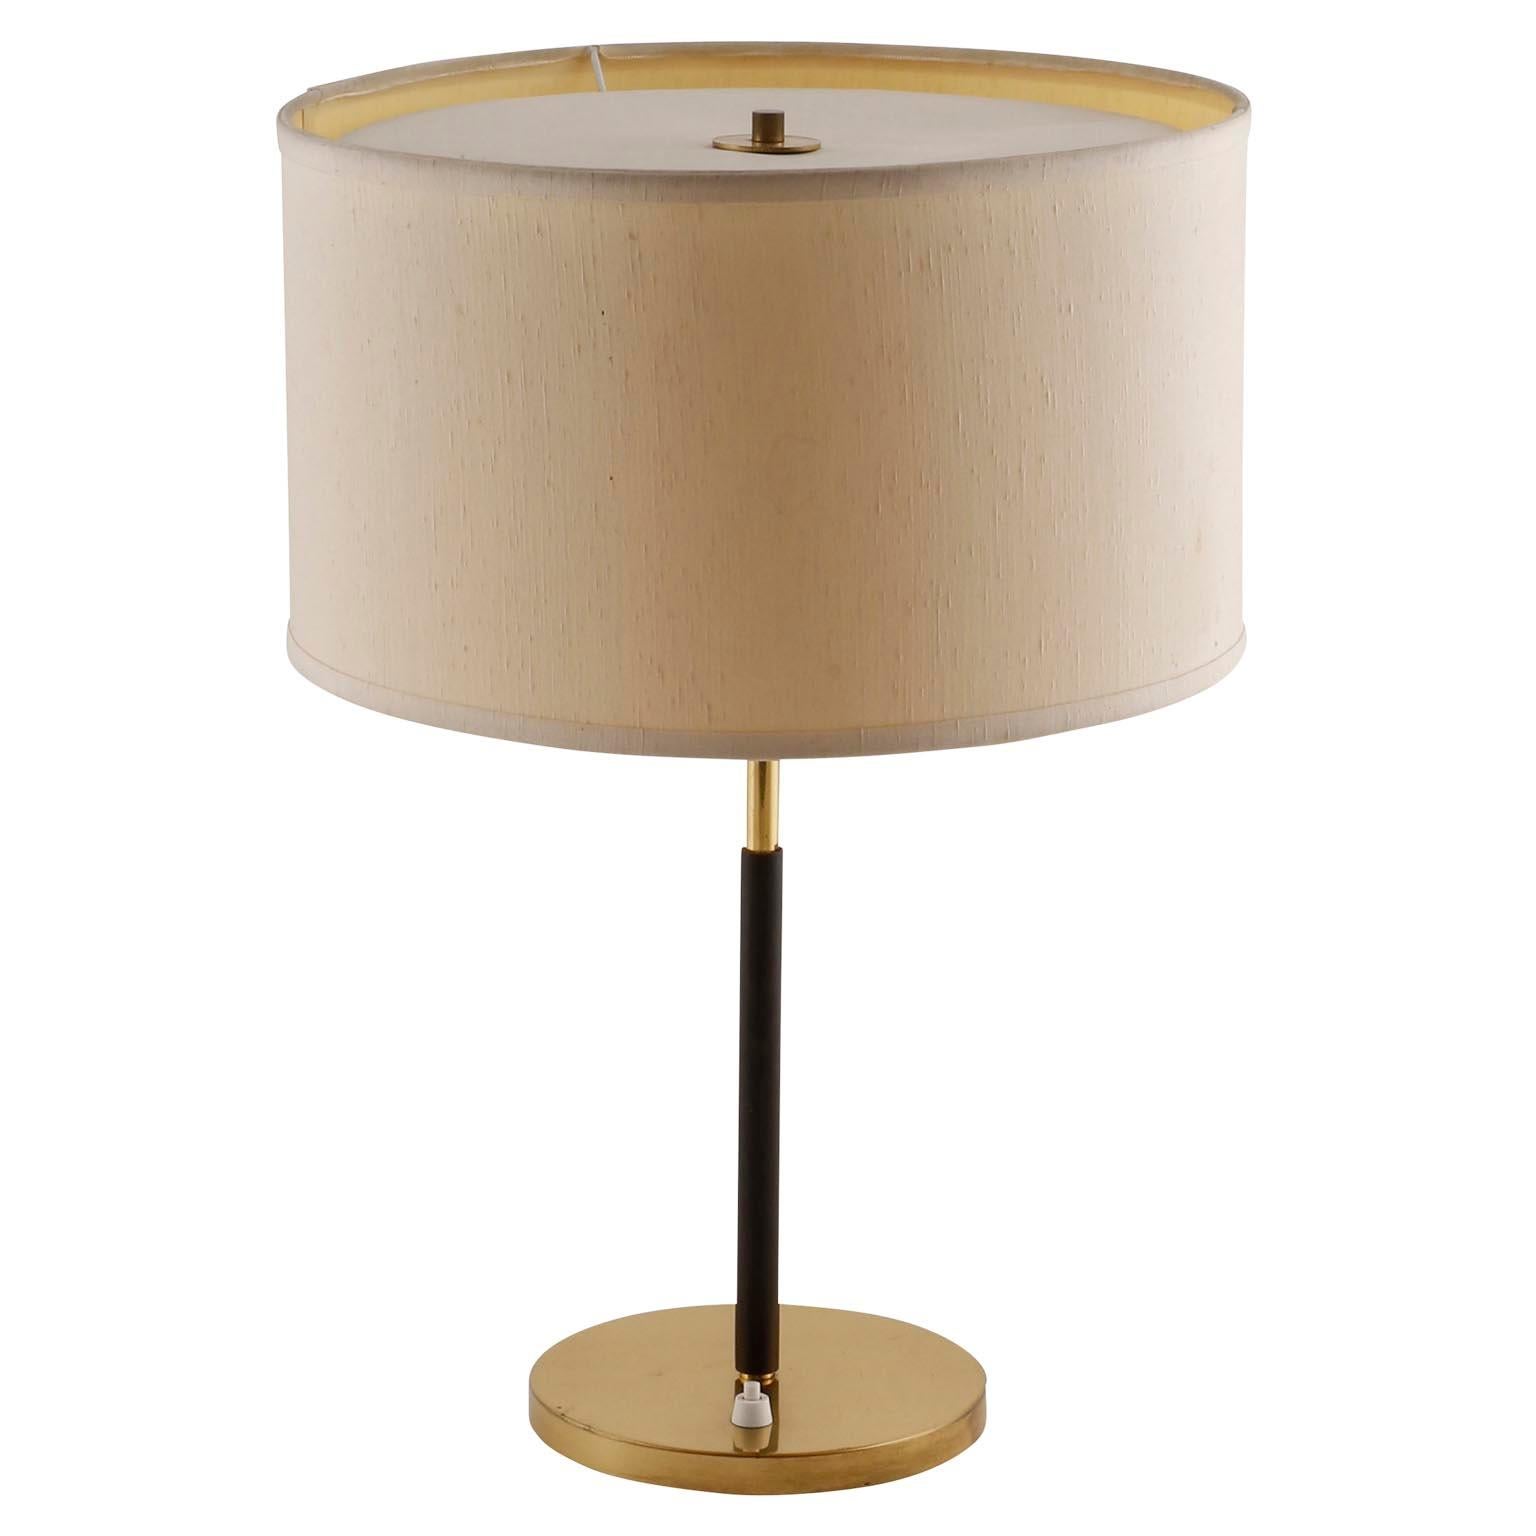 A table lamp by J.T. Kalmar, manufactured in midcentury, circa 1970 (late 1960s or 1970s).
It is made of a brass covered base, a covered stand with dark brown leather, brass fittings.
The shade is renewed on base of the original one. They will be